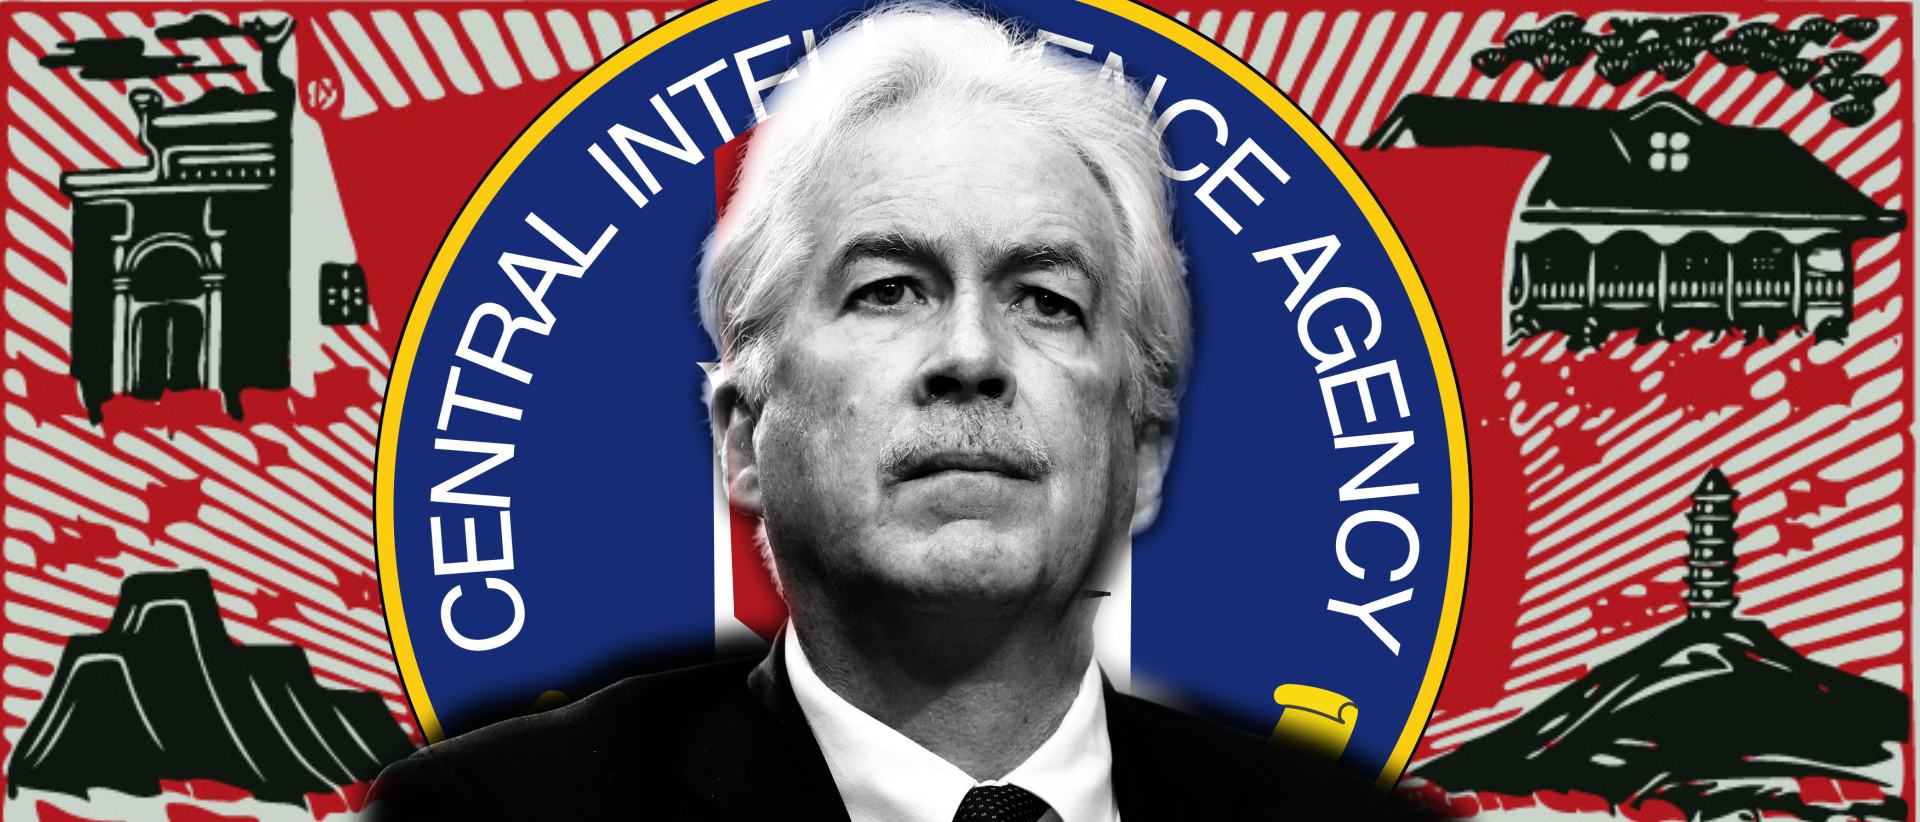 Carnegie employed CCP members during CIA Director Burns' presidency, the DCNF determined. (Artwork: The Daily Caller)